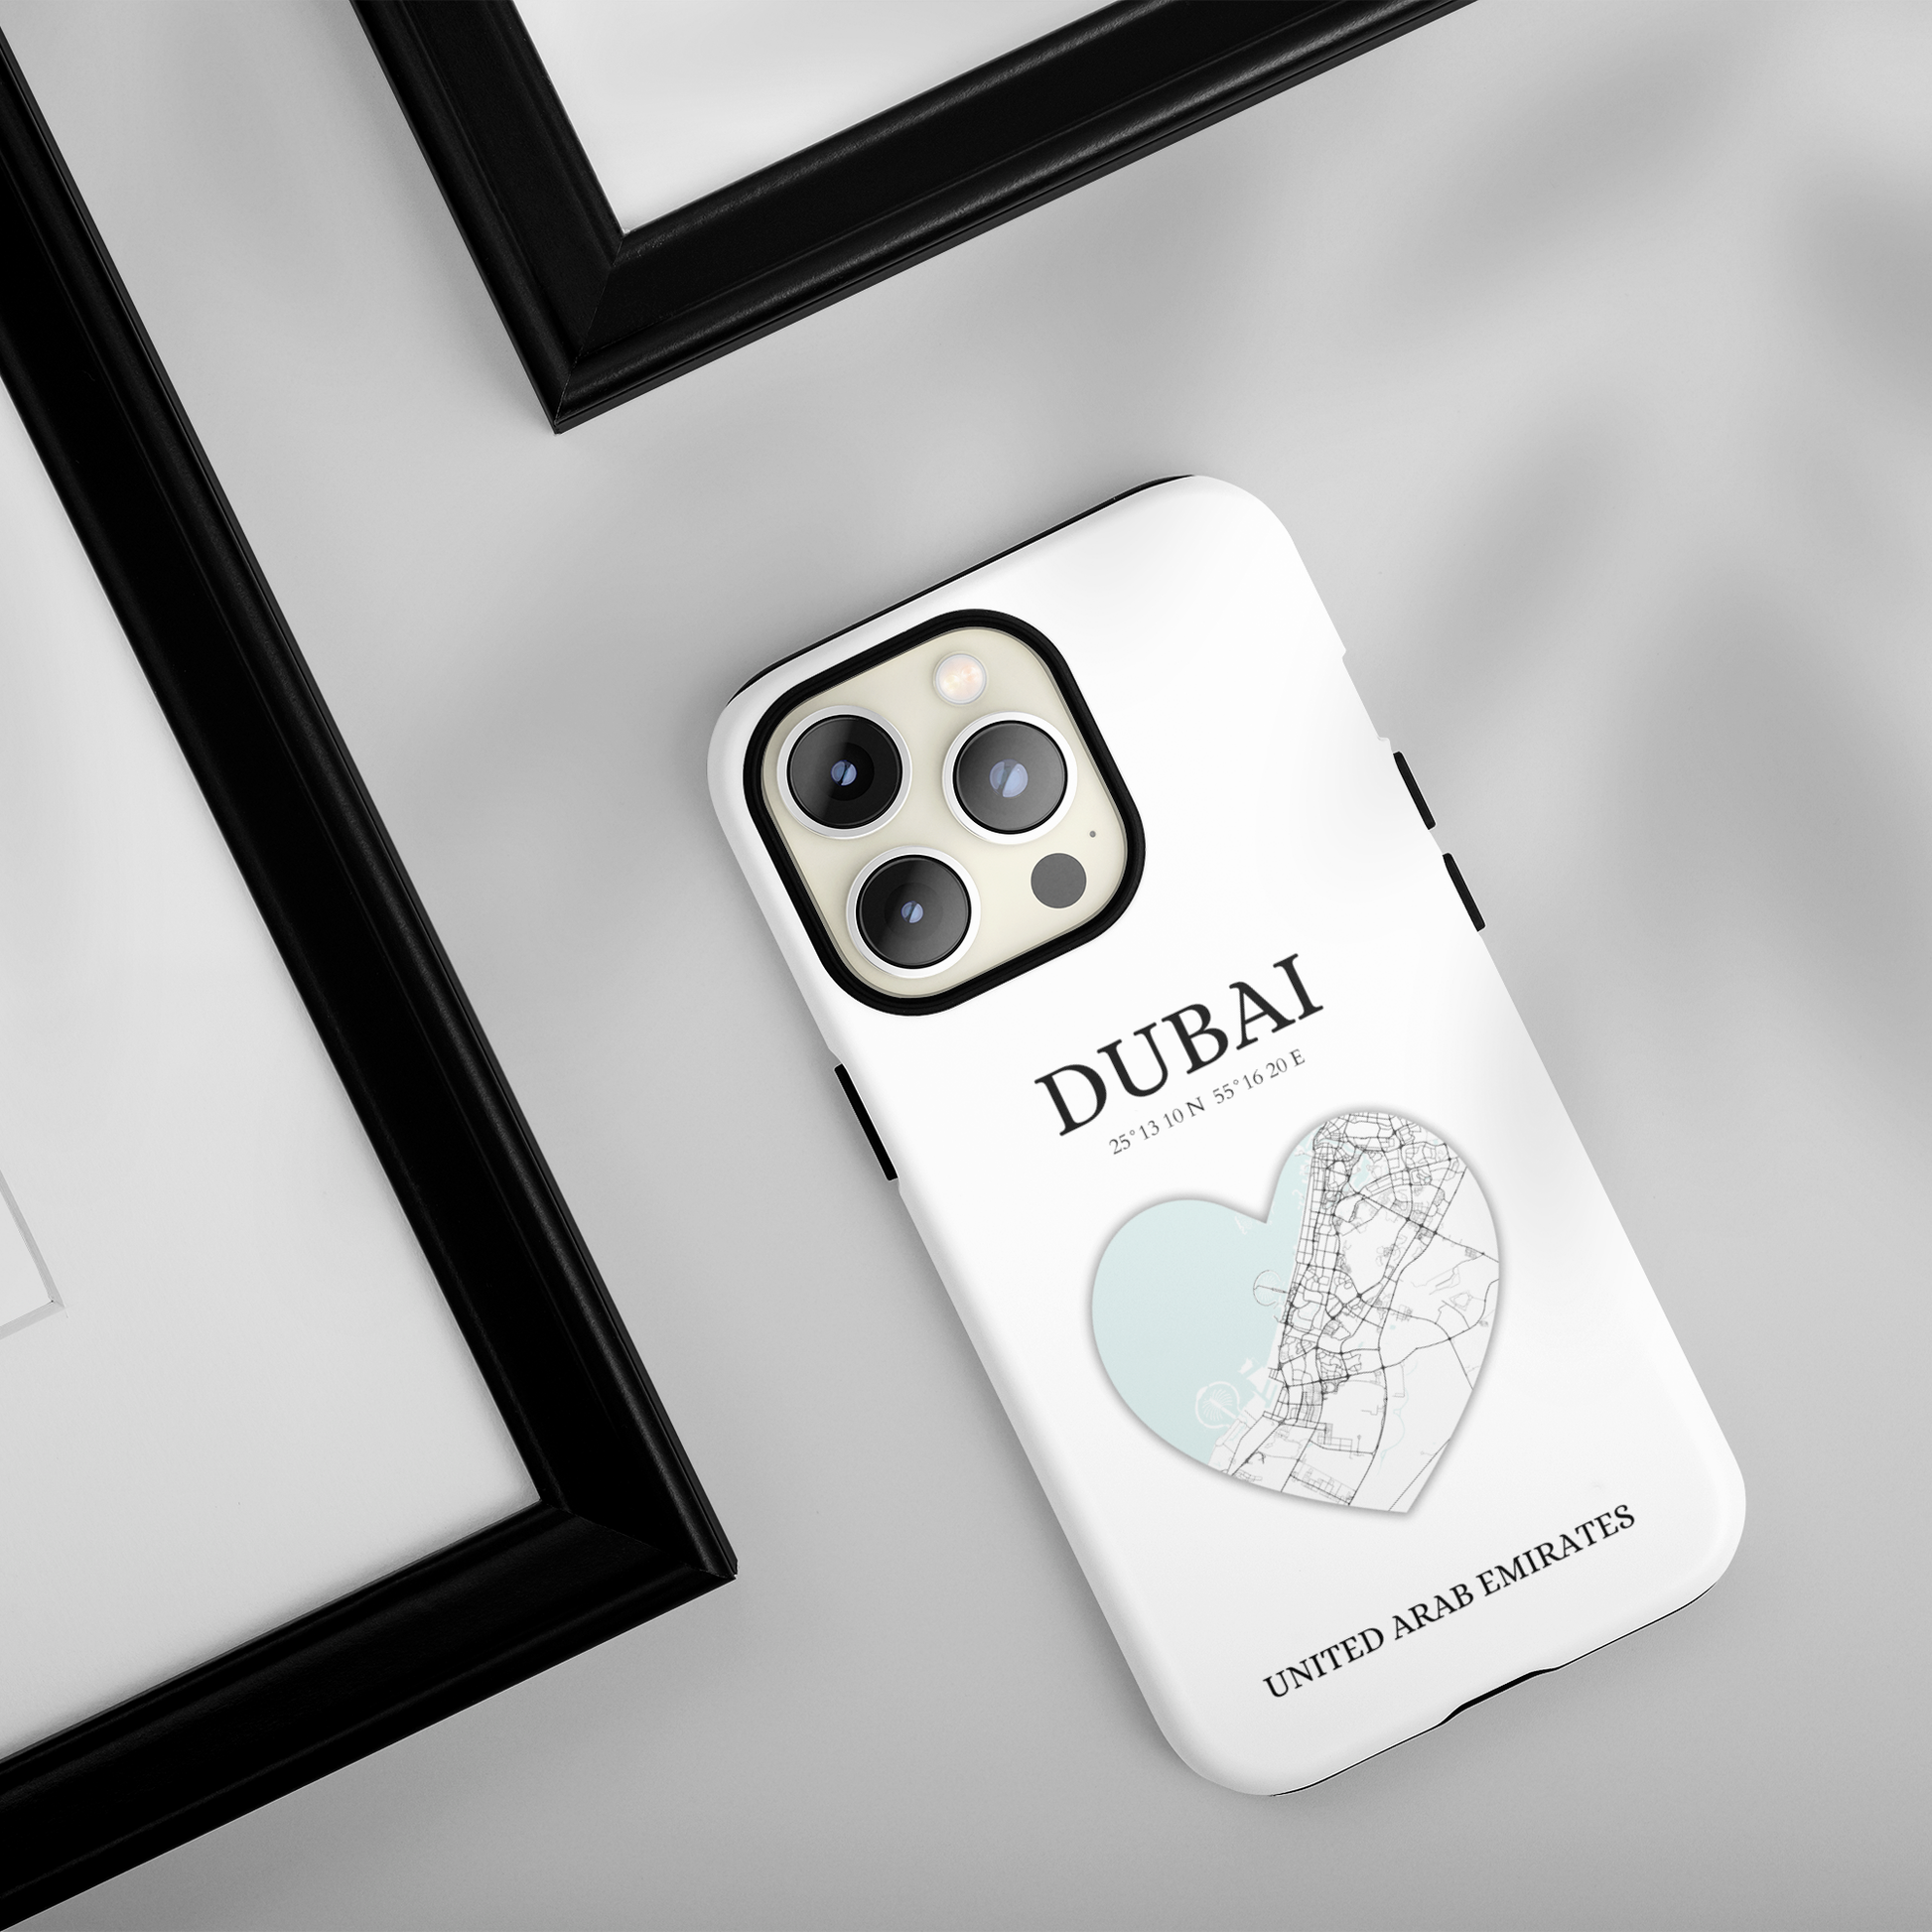 Dubai Heartbeat - White (iPhone Case 11-15)Capture the essence of Dubai with RimaGallery's Heartbeat White iPhone case, blending durable protection and unique design. Perfect for iPhone 11-15 models. Free shiRimaGallery